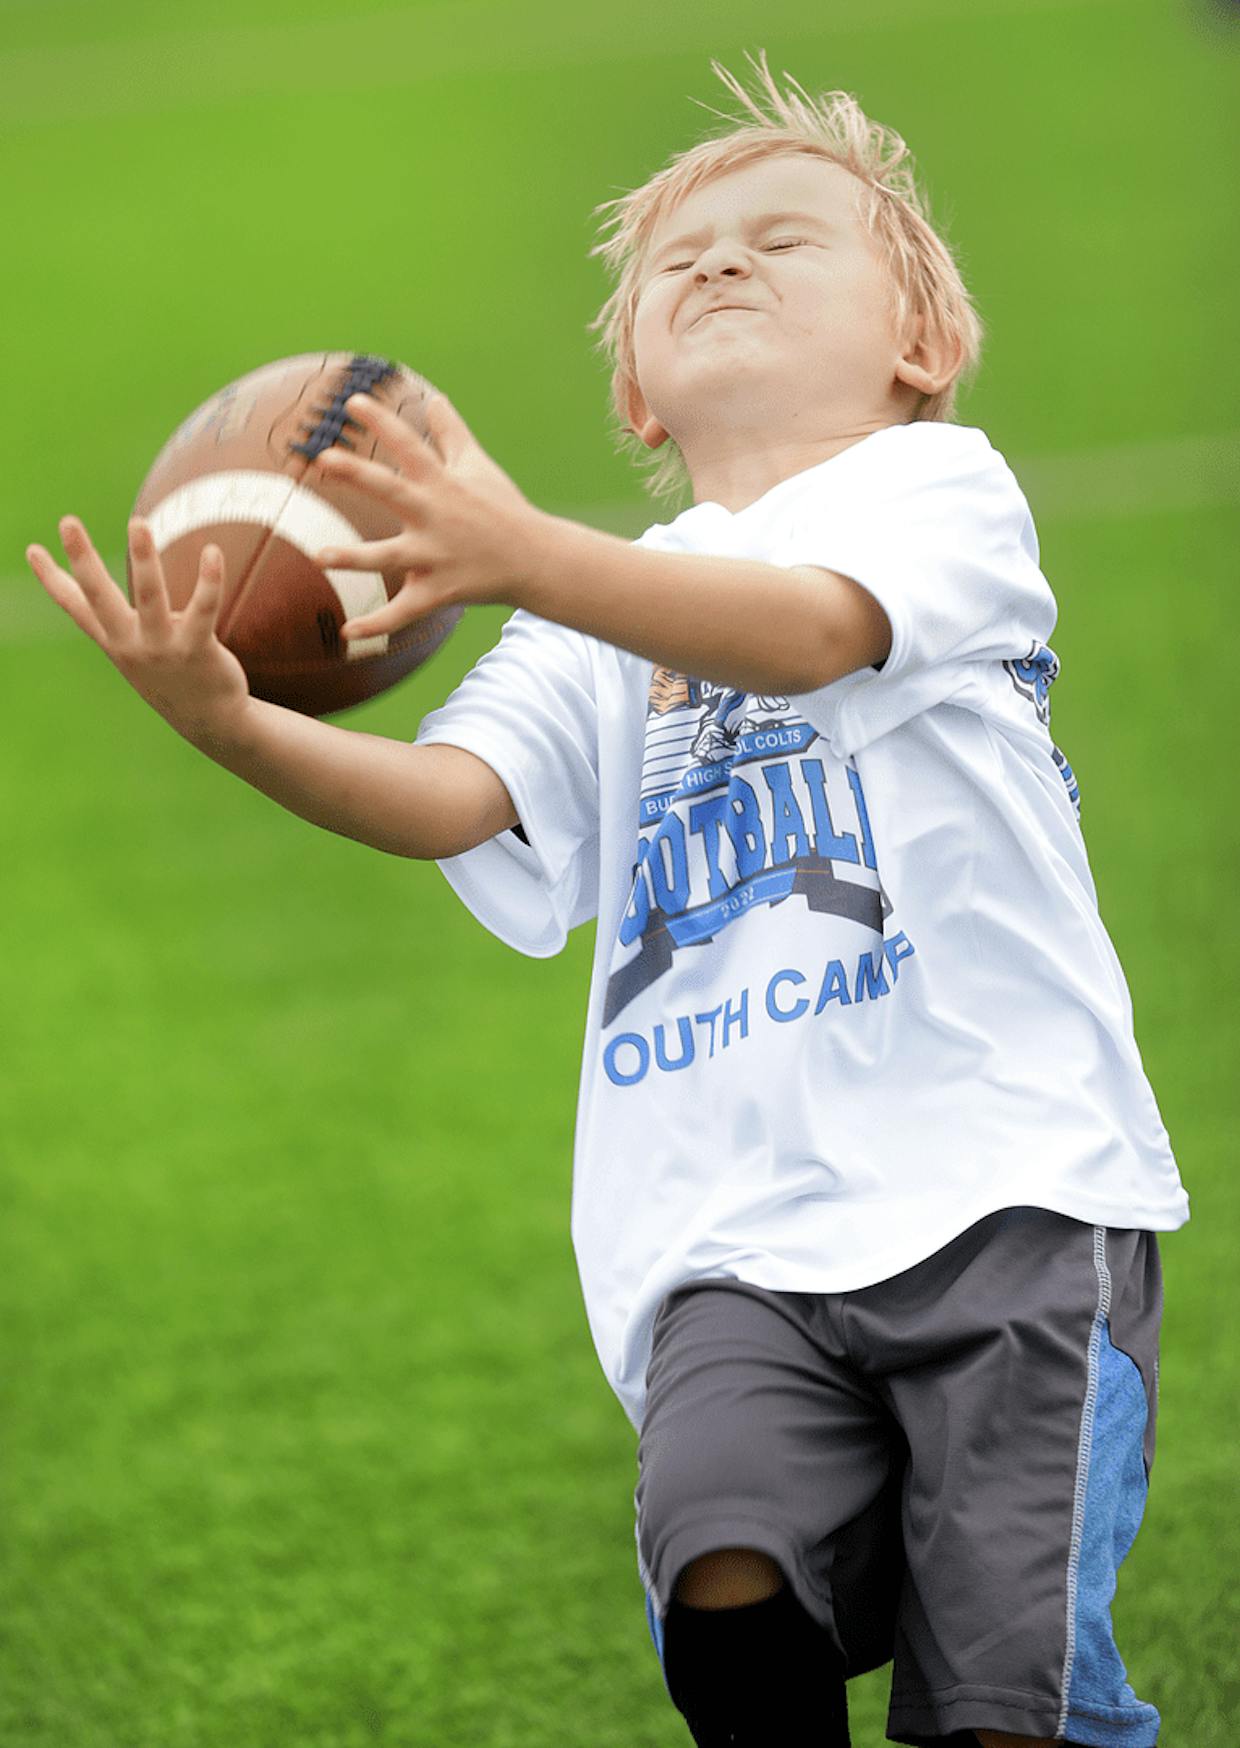 Saturday Buena High School head football coach Joe Thomas hosted a free youth football camp at Cyr Field with several of his coaches and players. Five-year-old Erik Justesen gives it his all at this weekend’s camp.